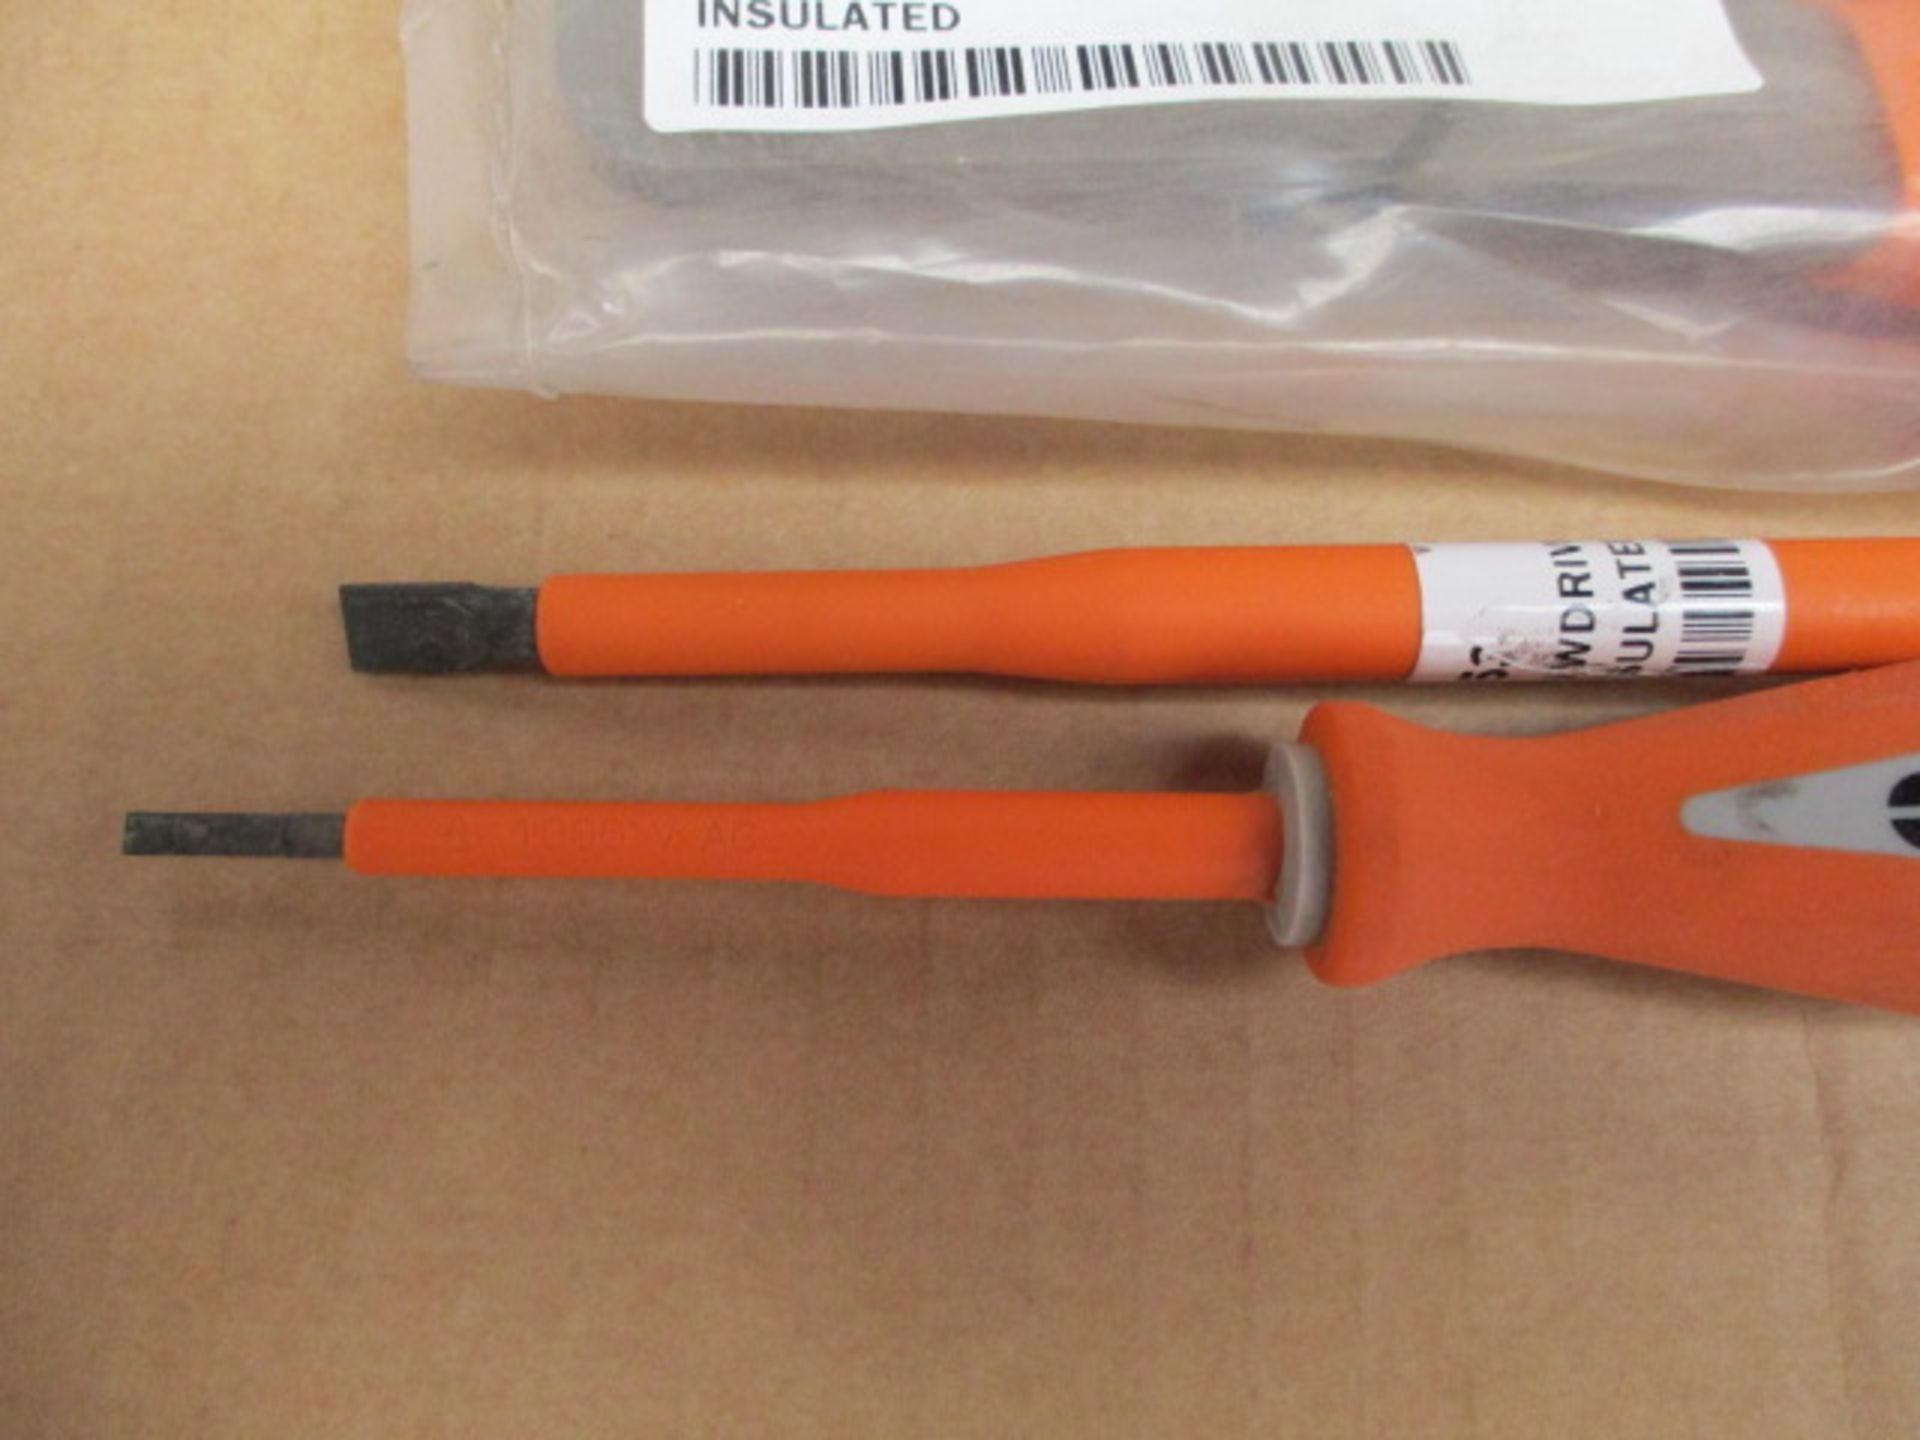 Insulated hand tools - Image 3 of 4